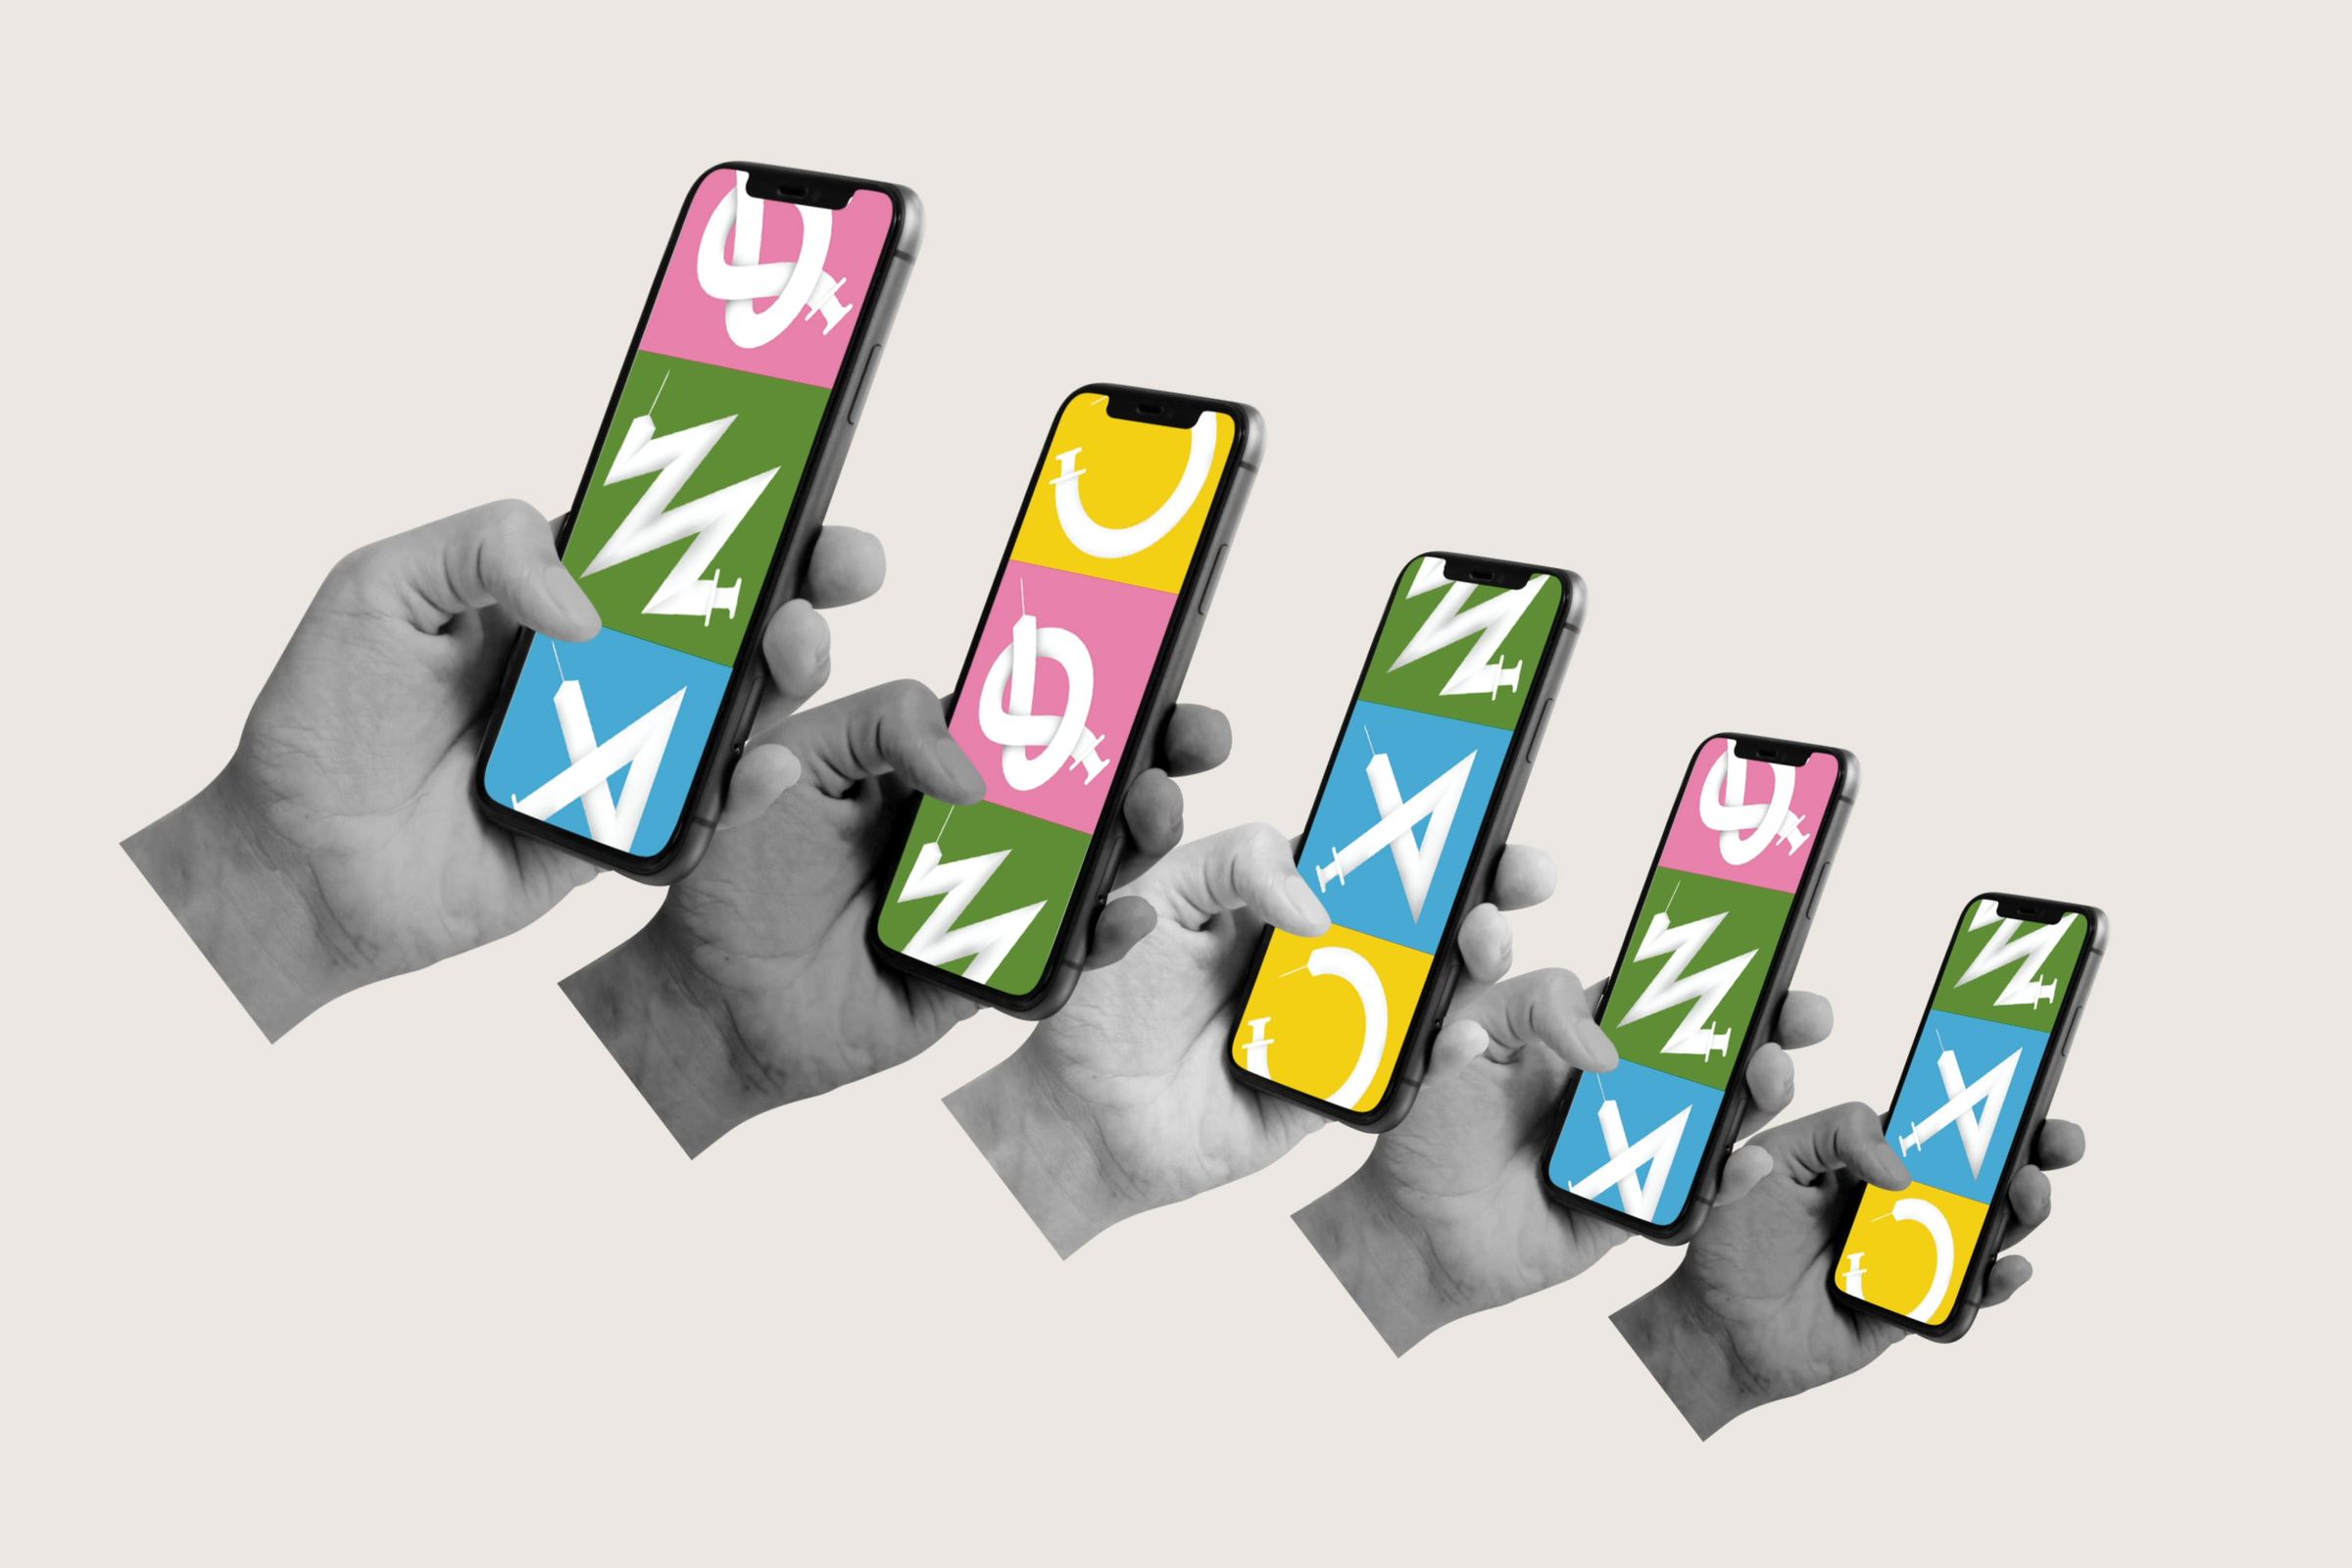 An illustration of five hands, each scrolling through images of syringes twisted out of shape on mobile phones.